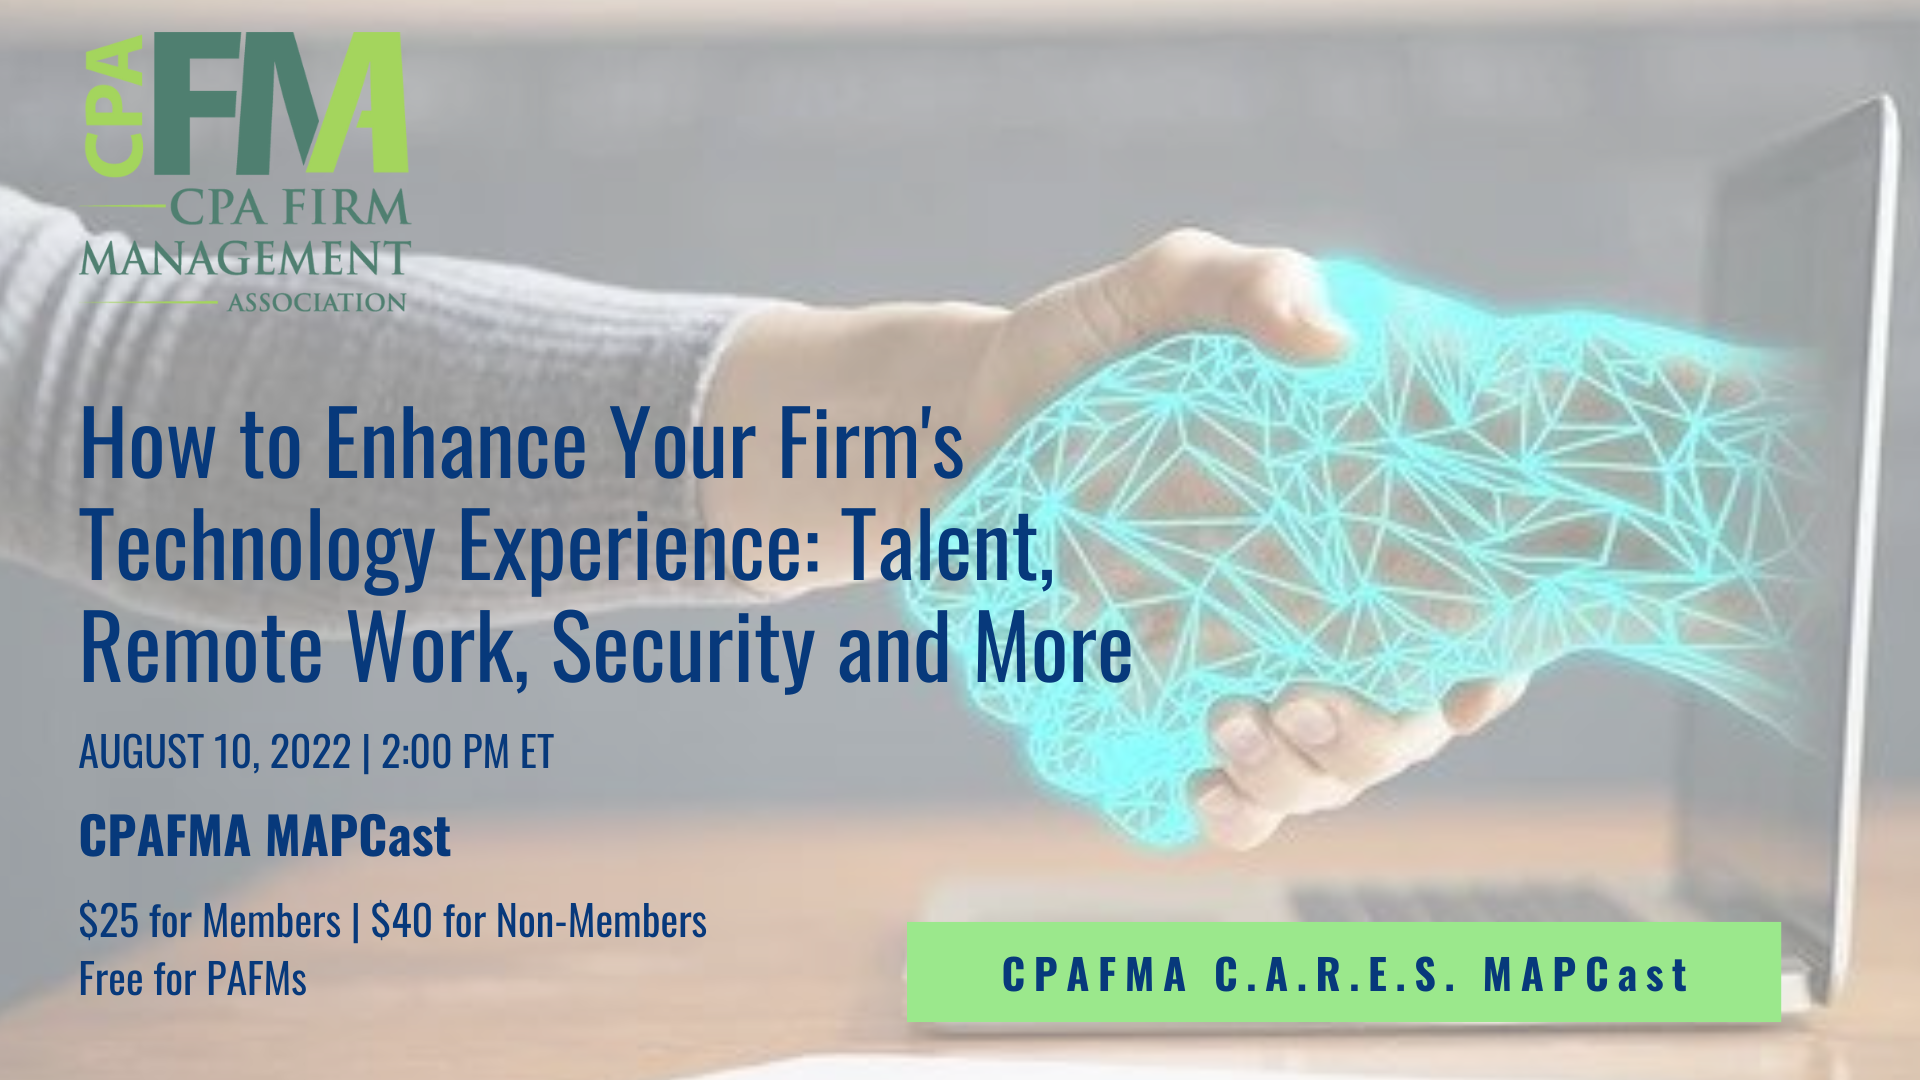 How to Enhance Your Firm’s Technology Experience: Talent, Remote Work, Security and More